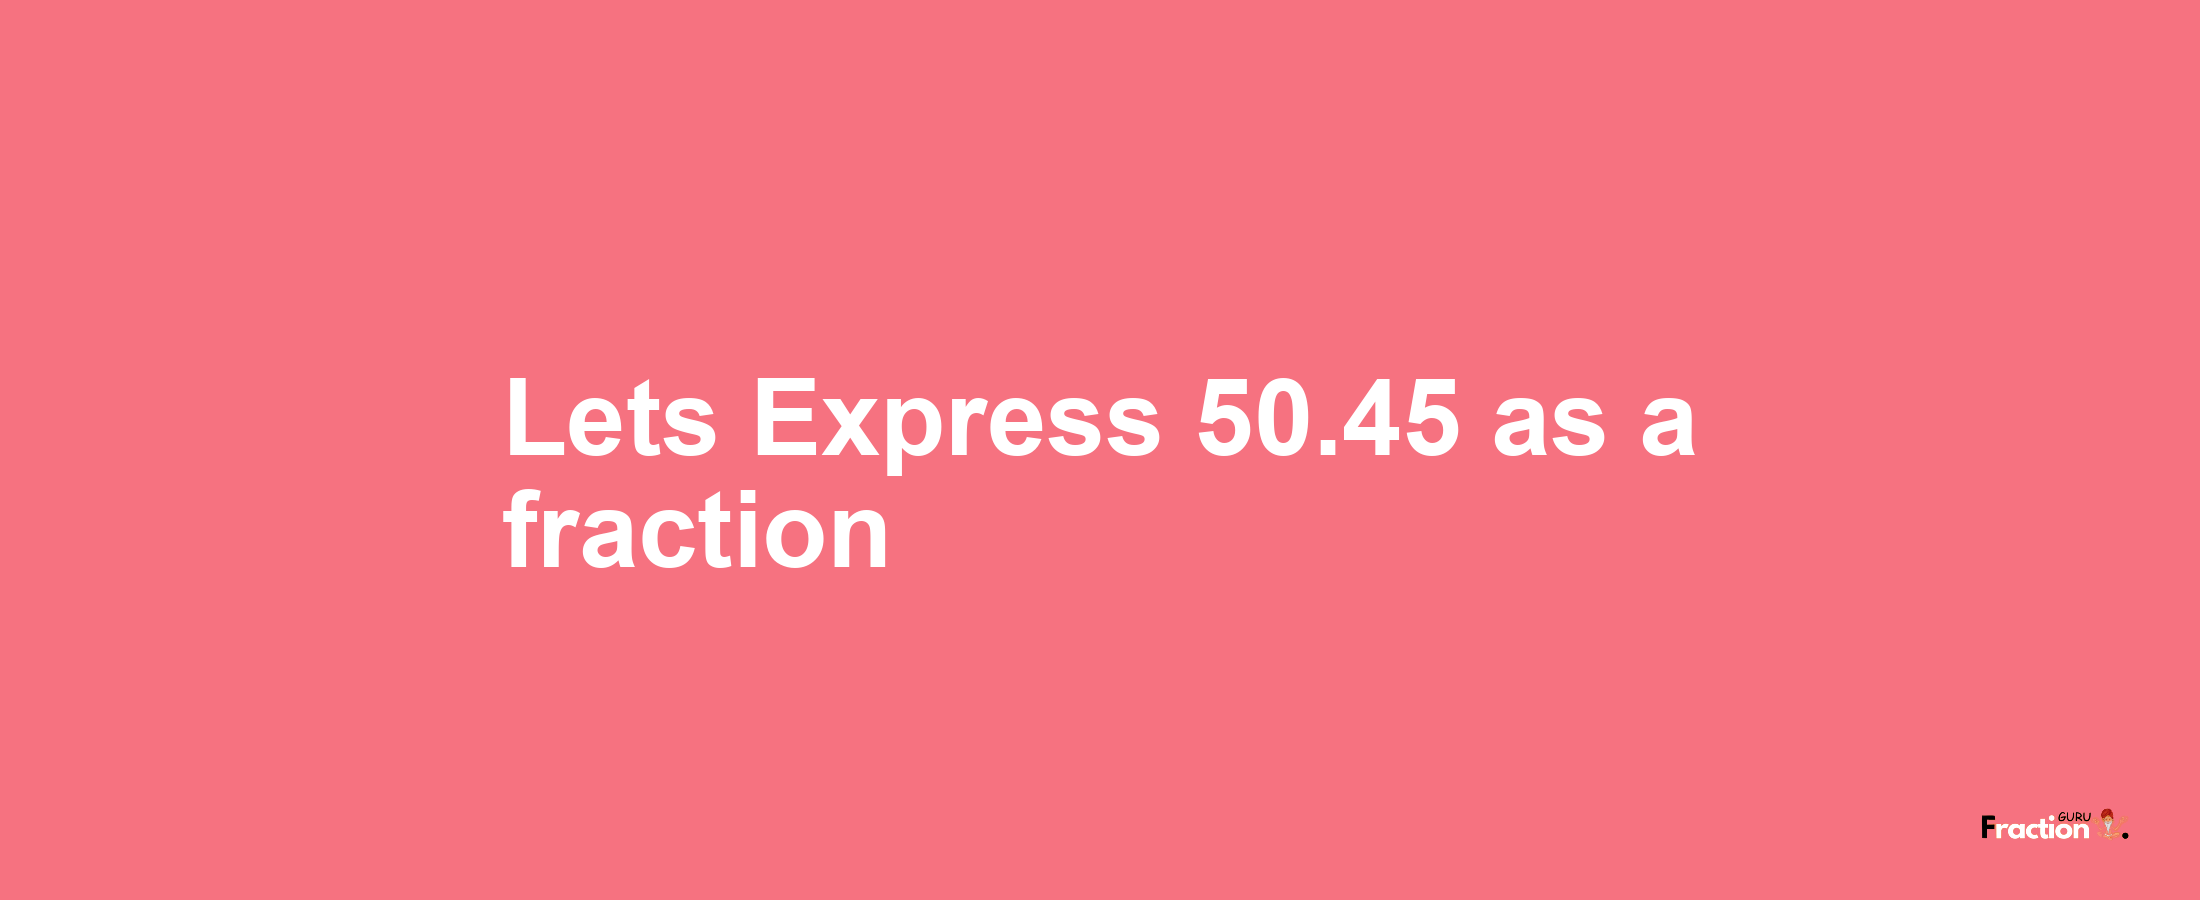 Lets Express 50.45 as afraction